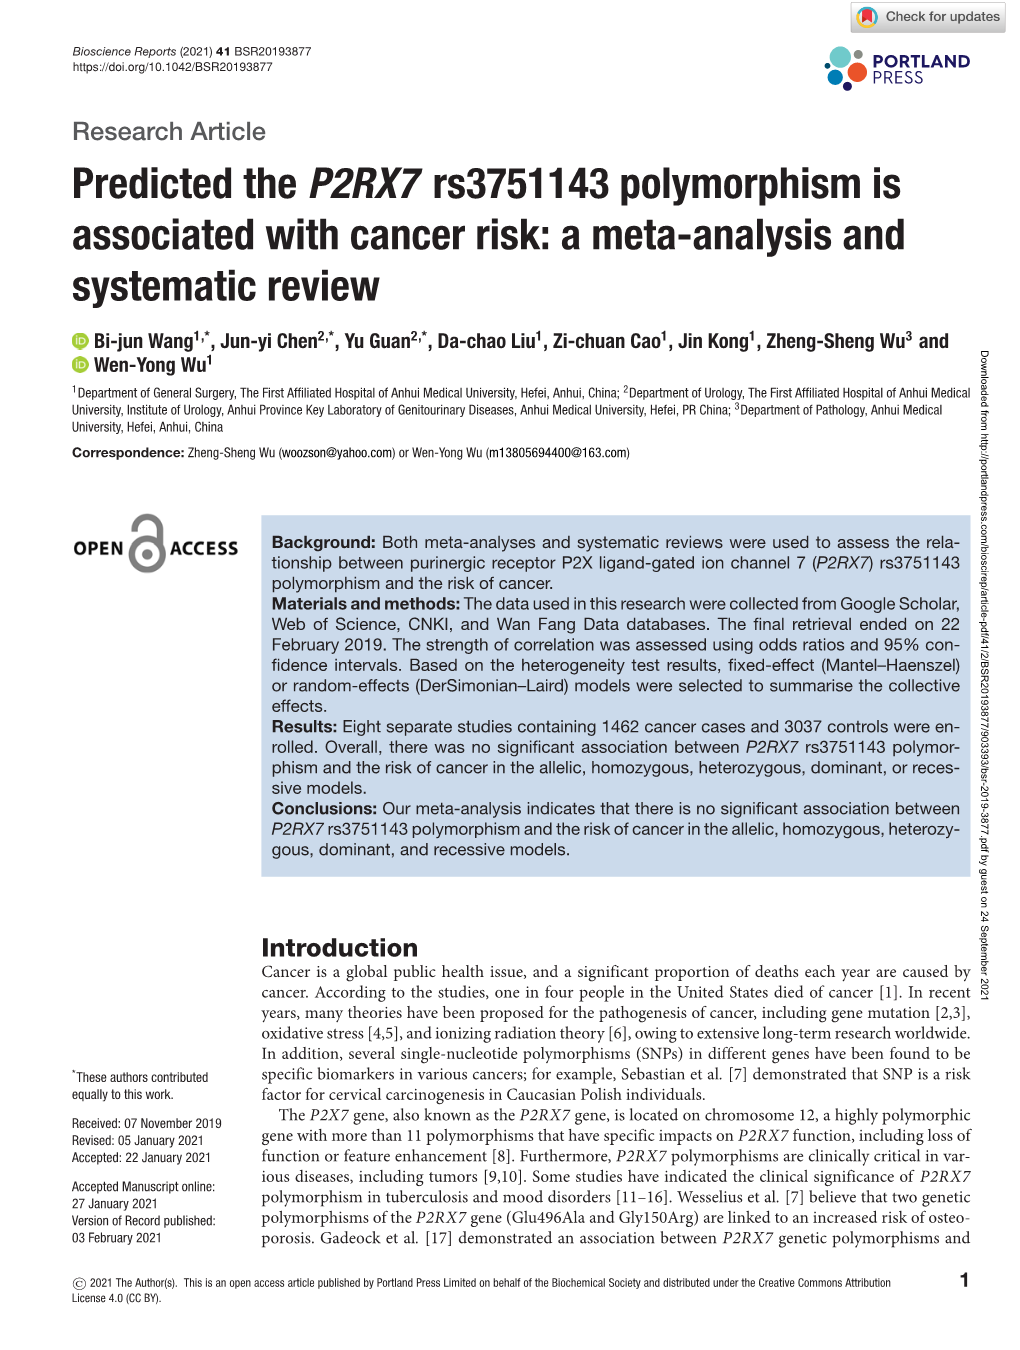 Predicted the P2RX7 Rs3751143 Polymorphism Is Associated with Cancer Risk: a Meta-Analysis and Systematic Review